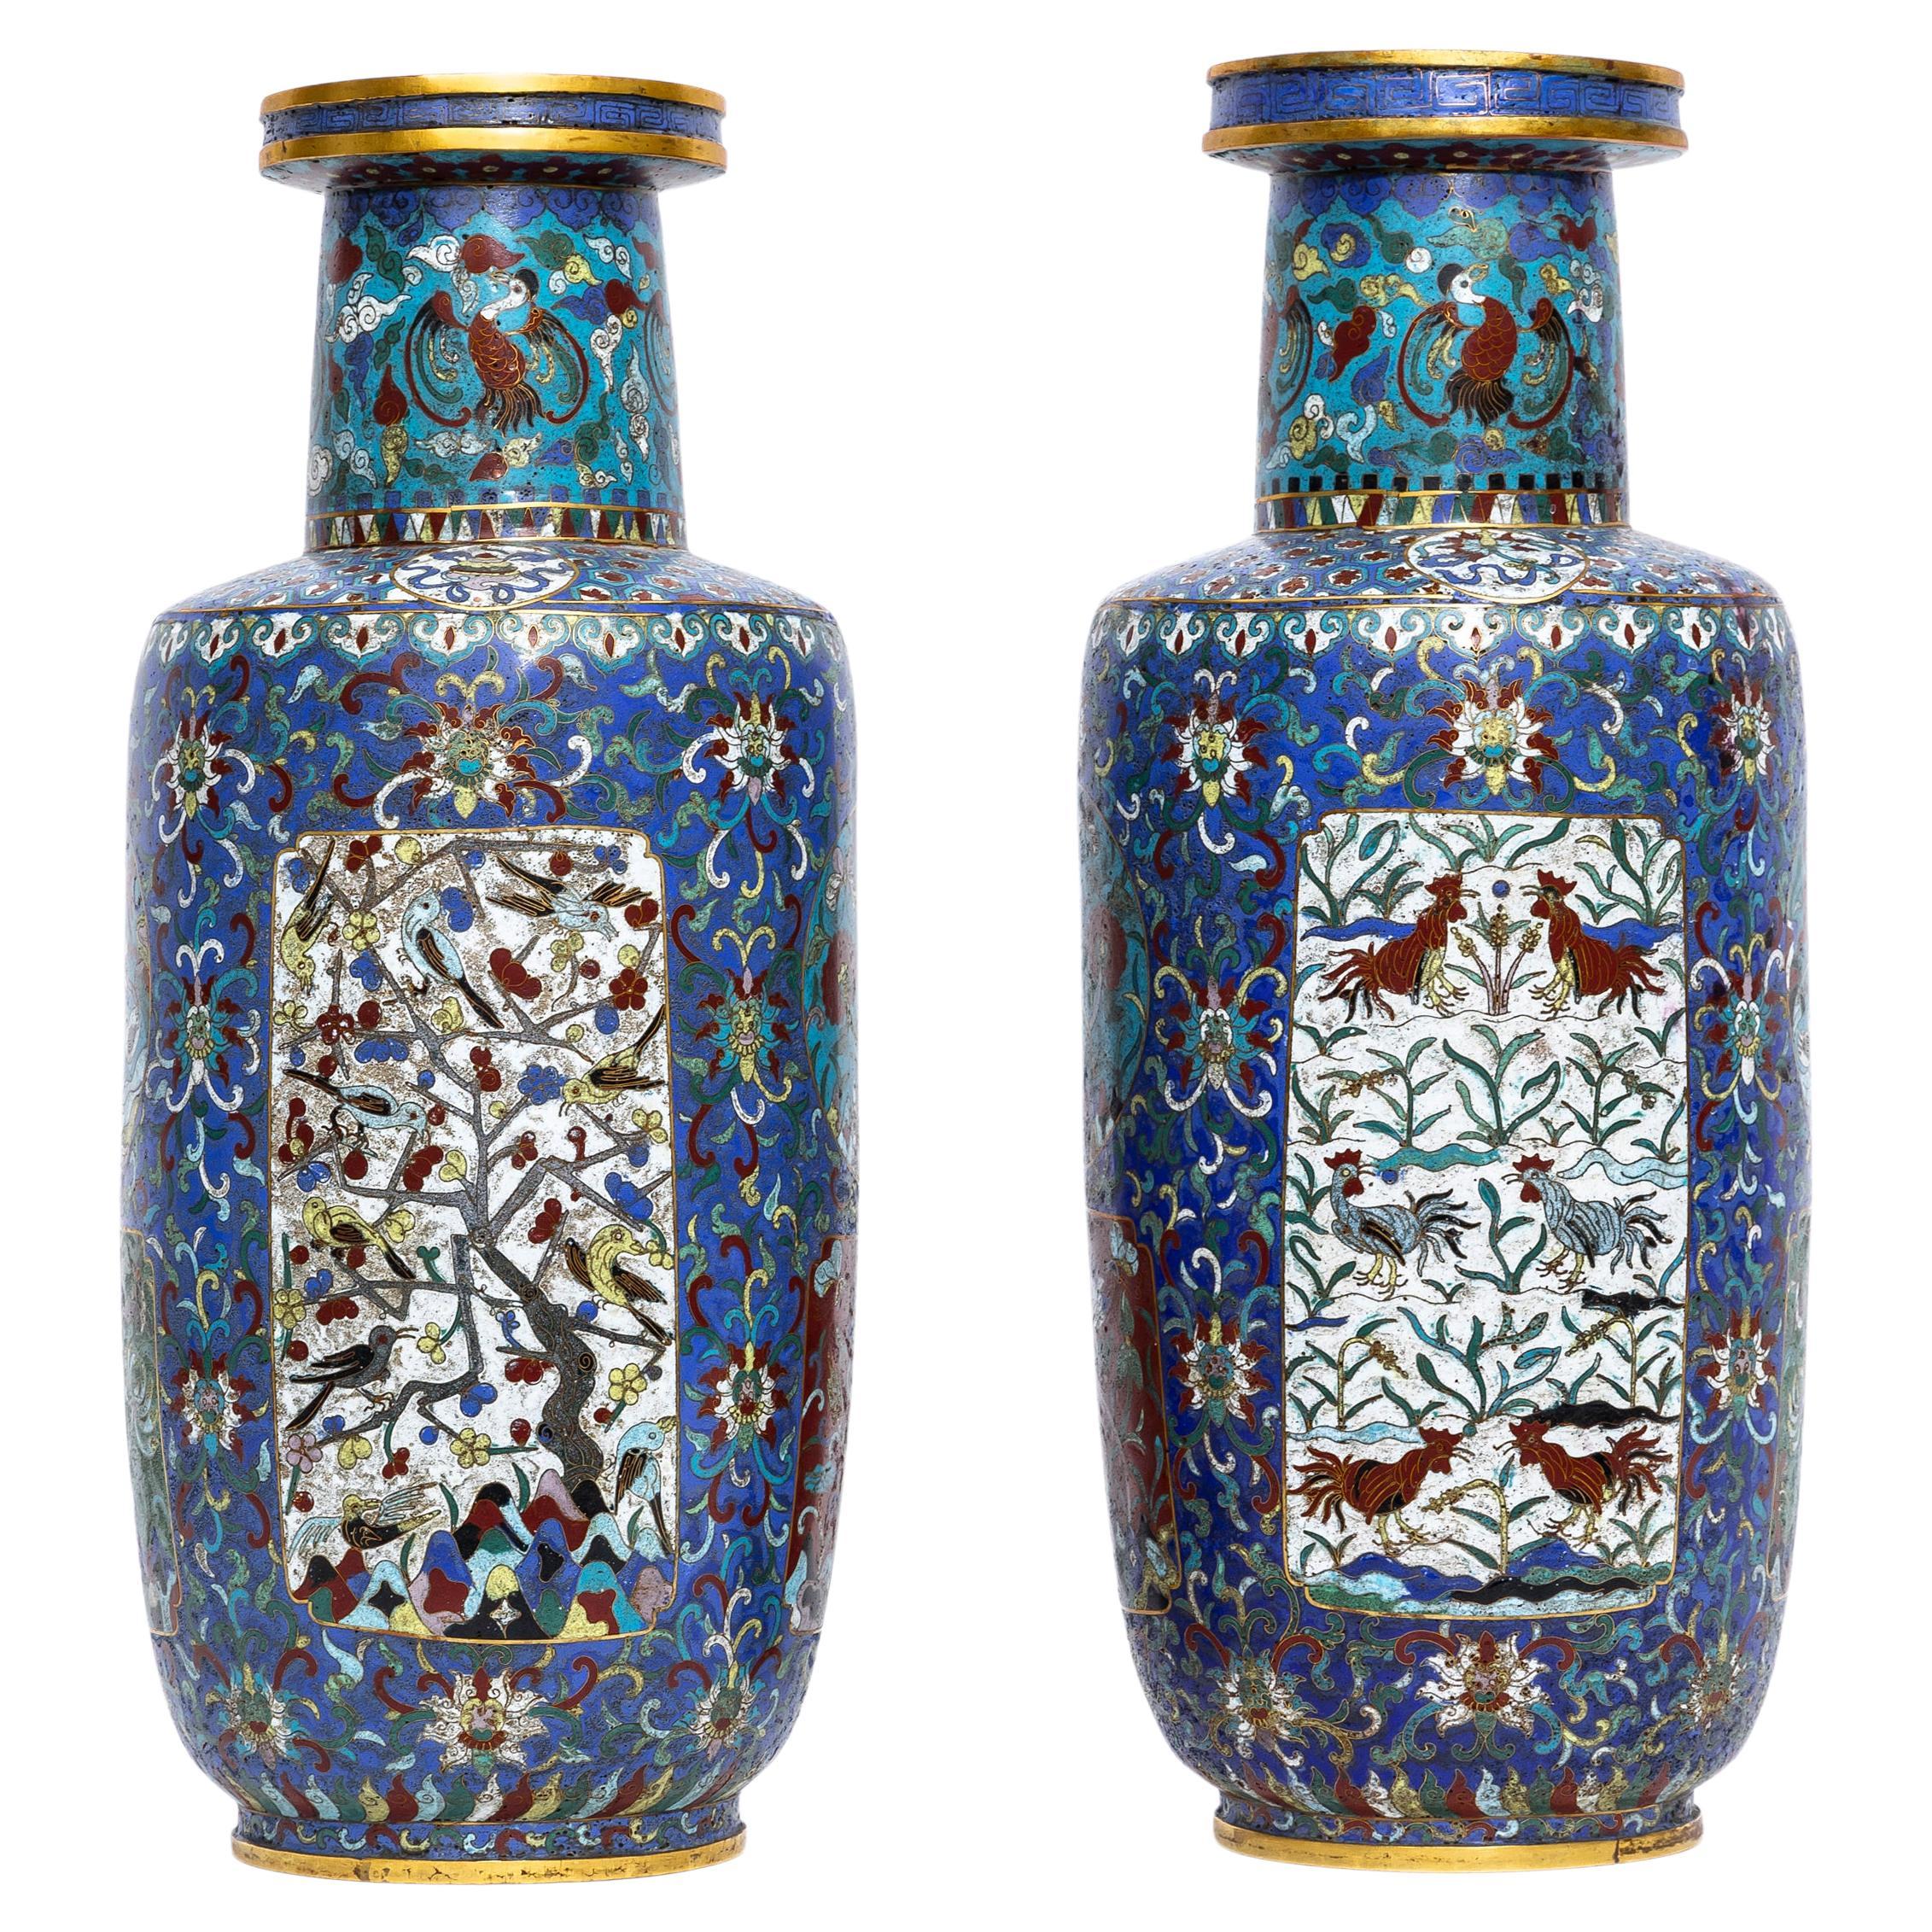 Pair Chinese 19th C. Qing Dynasty, Cloisonne Multi-Cartouche Vases from Museum